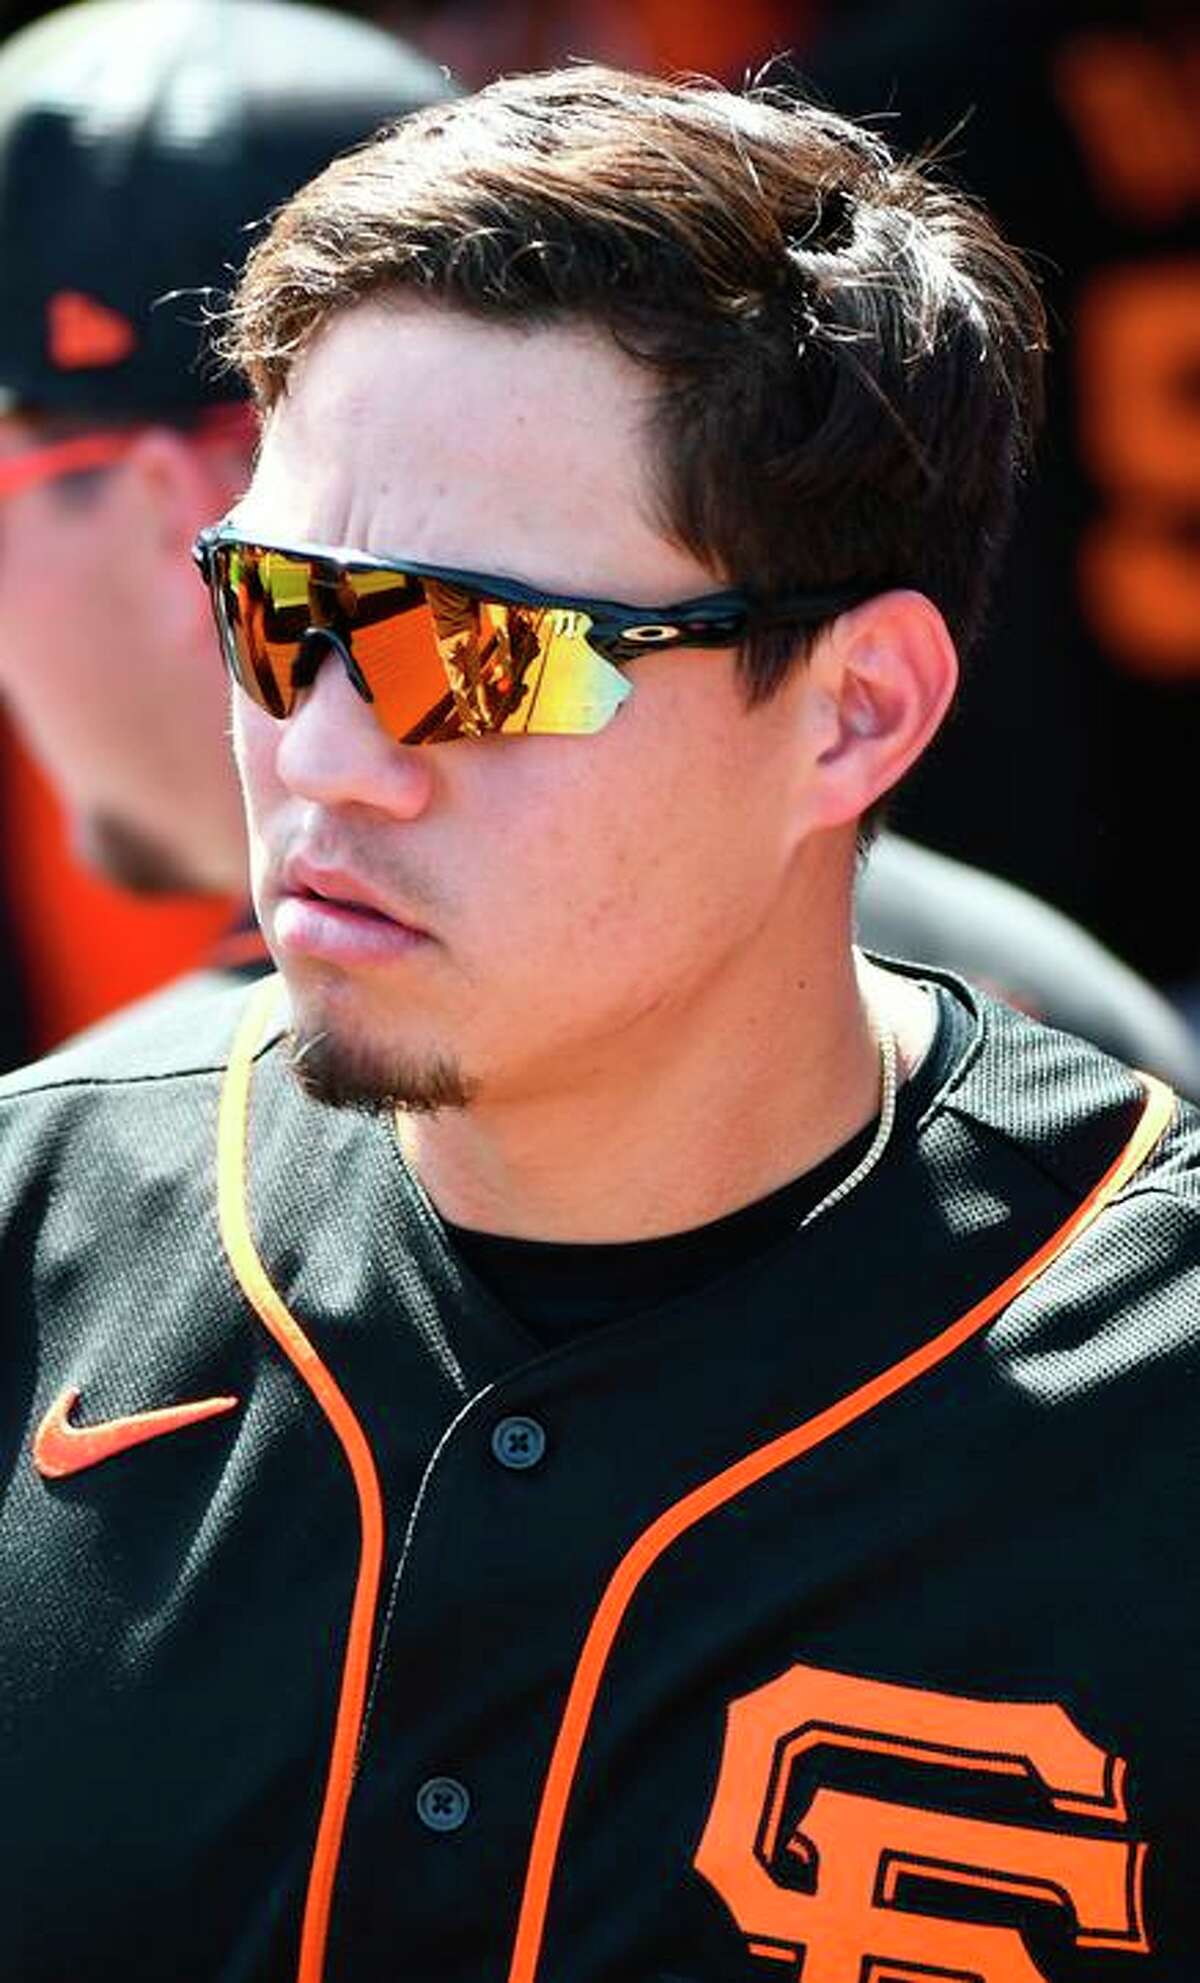 Giants' Wilmer Flores has brother in Futures Game — named Wilmer Flores